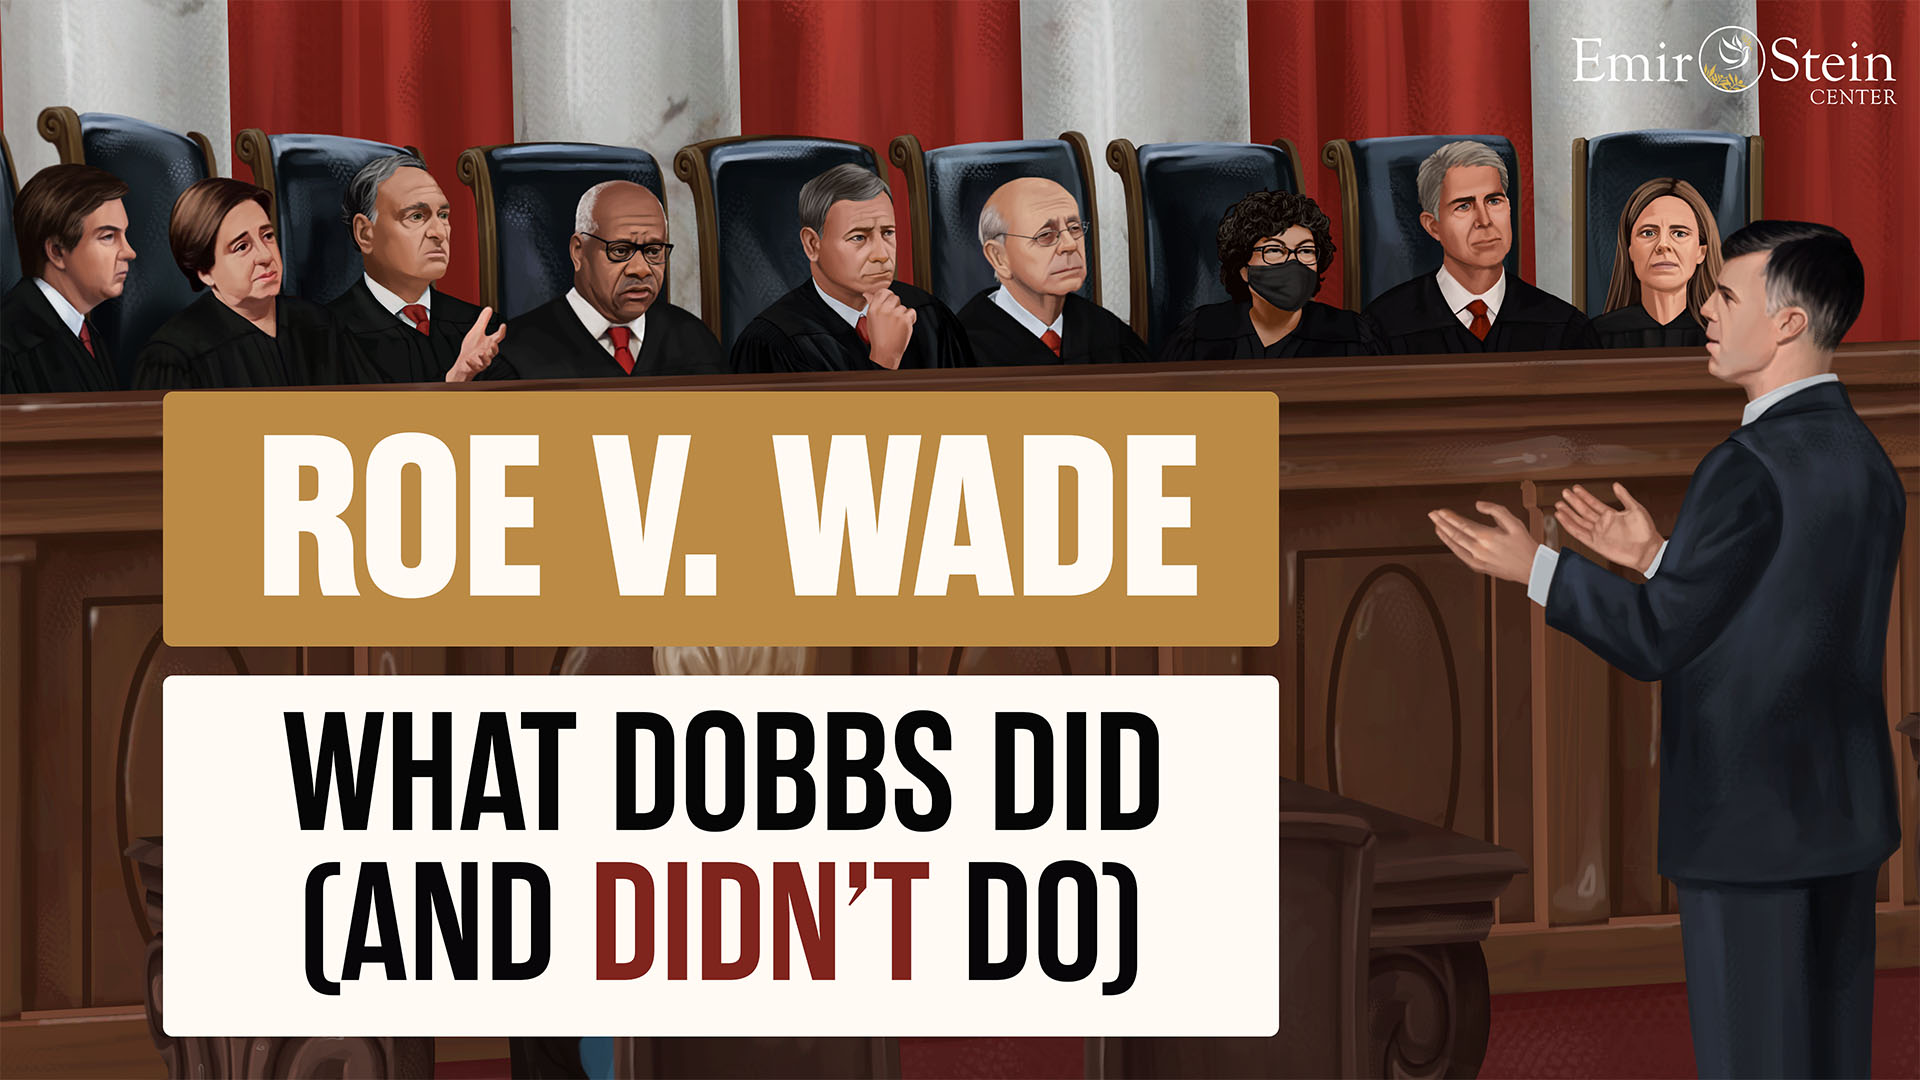 Was the Supreme Court Right in Overturning Roe v. Wade?